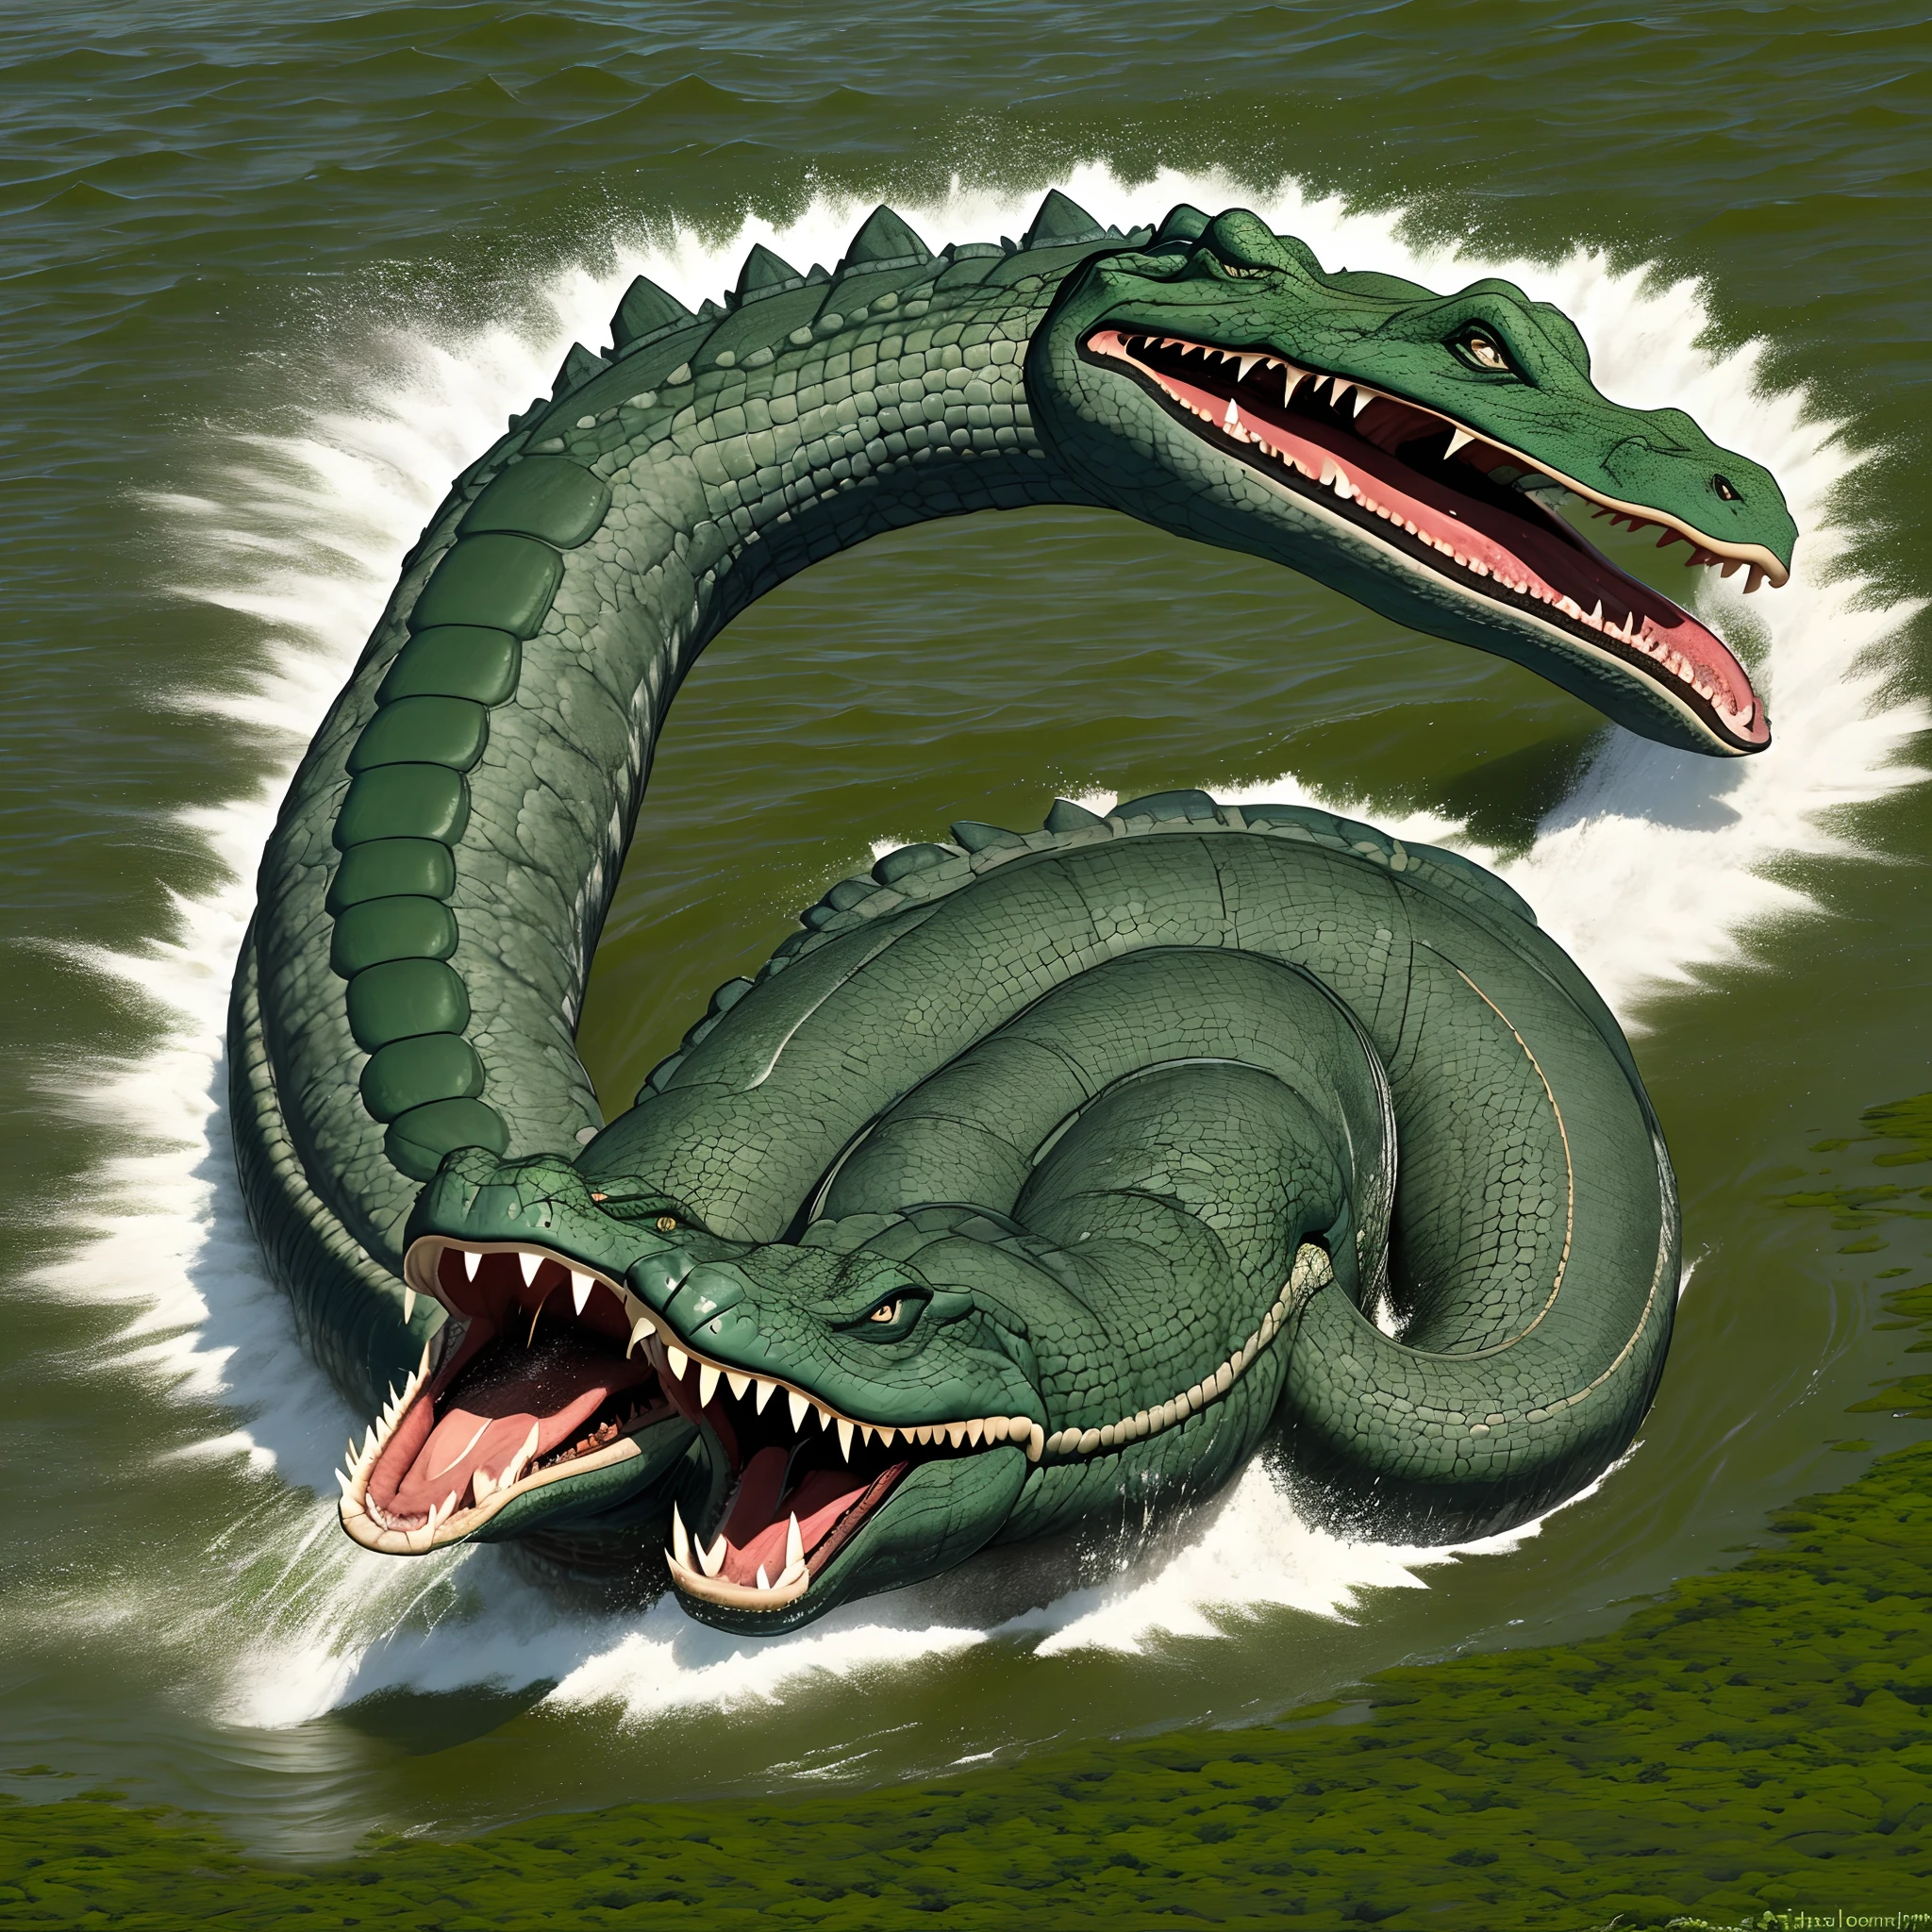 Giant anaconda fighting with a huge jaguar and a giant alligator Açu in the middle of the Amazon River